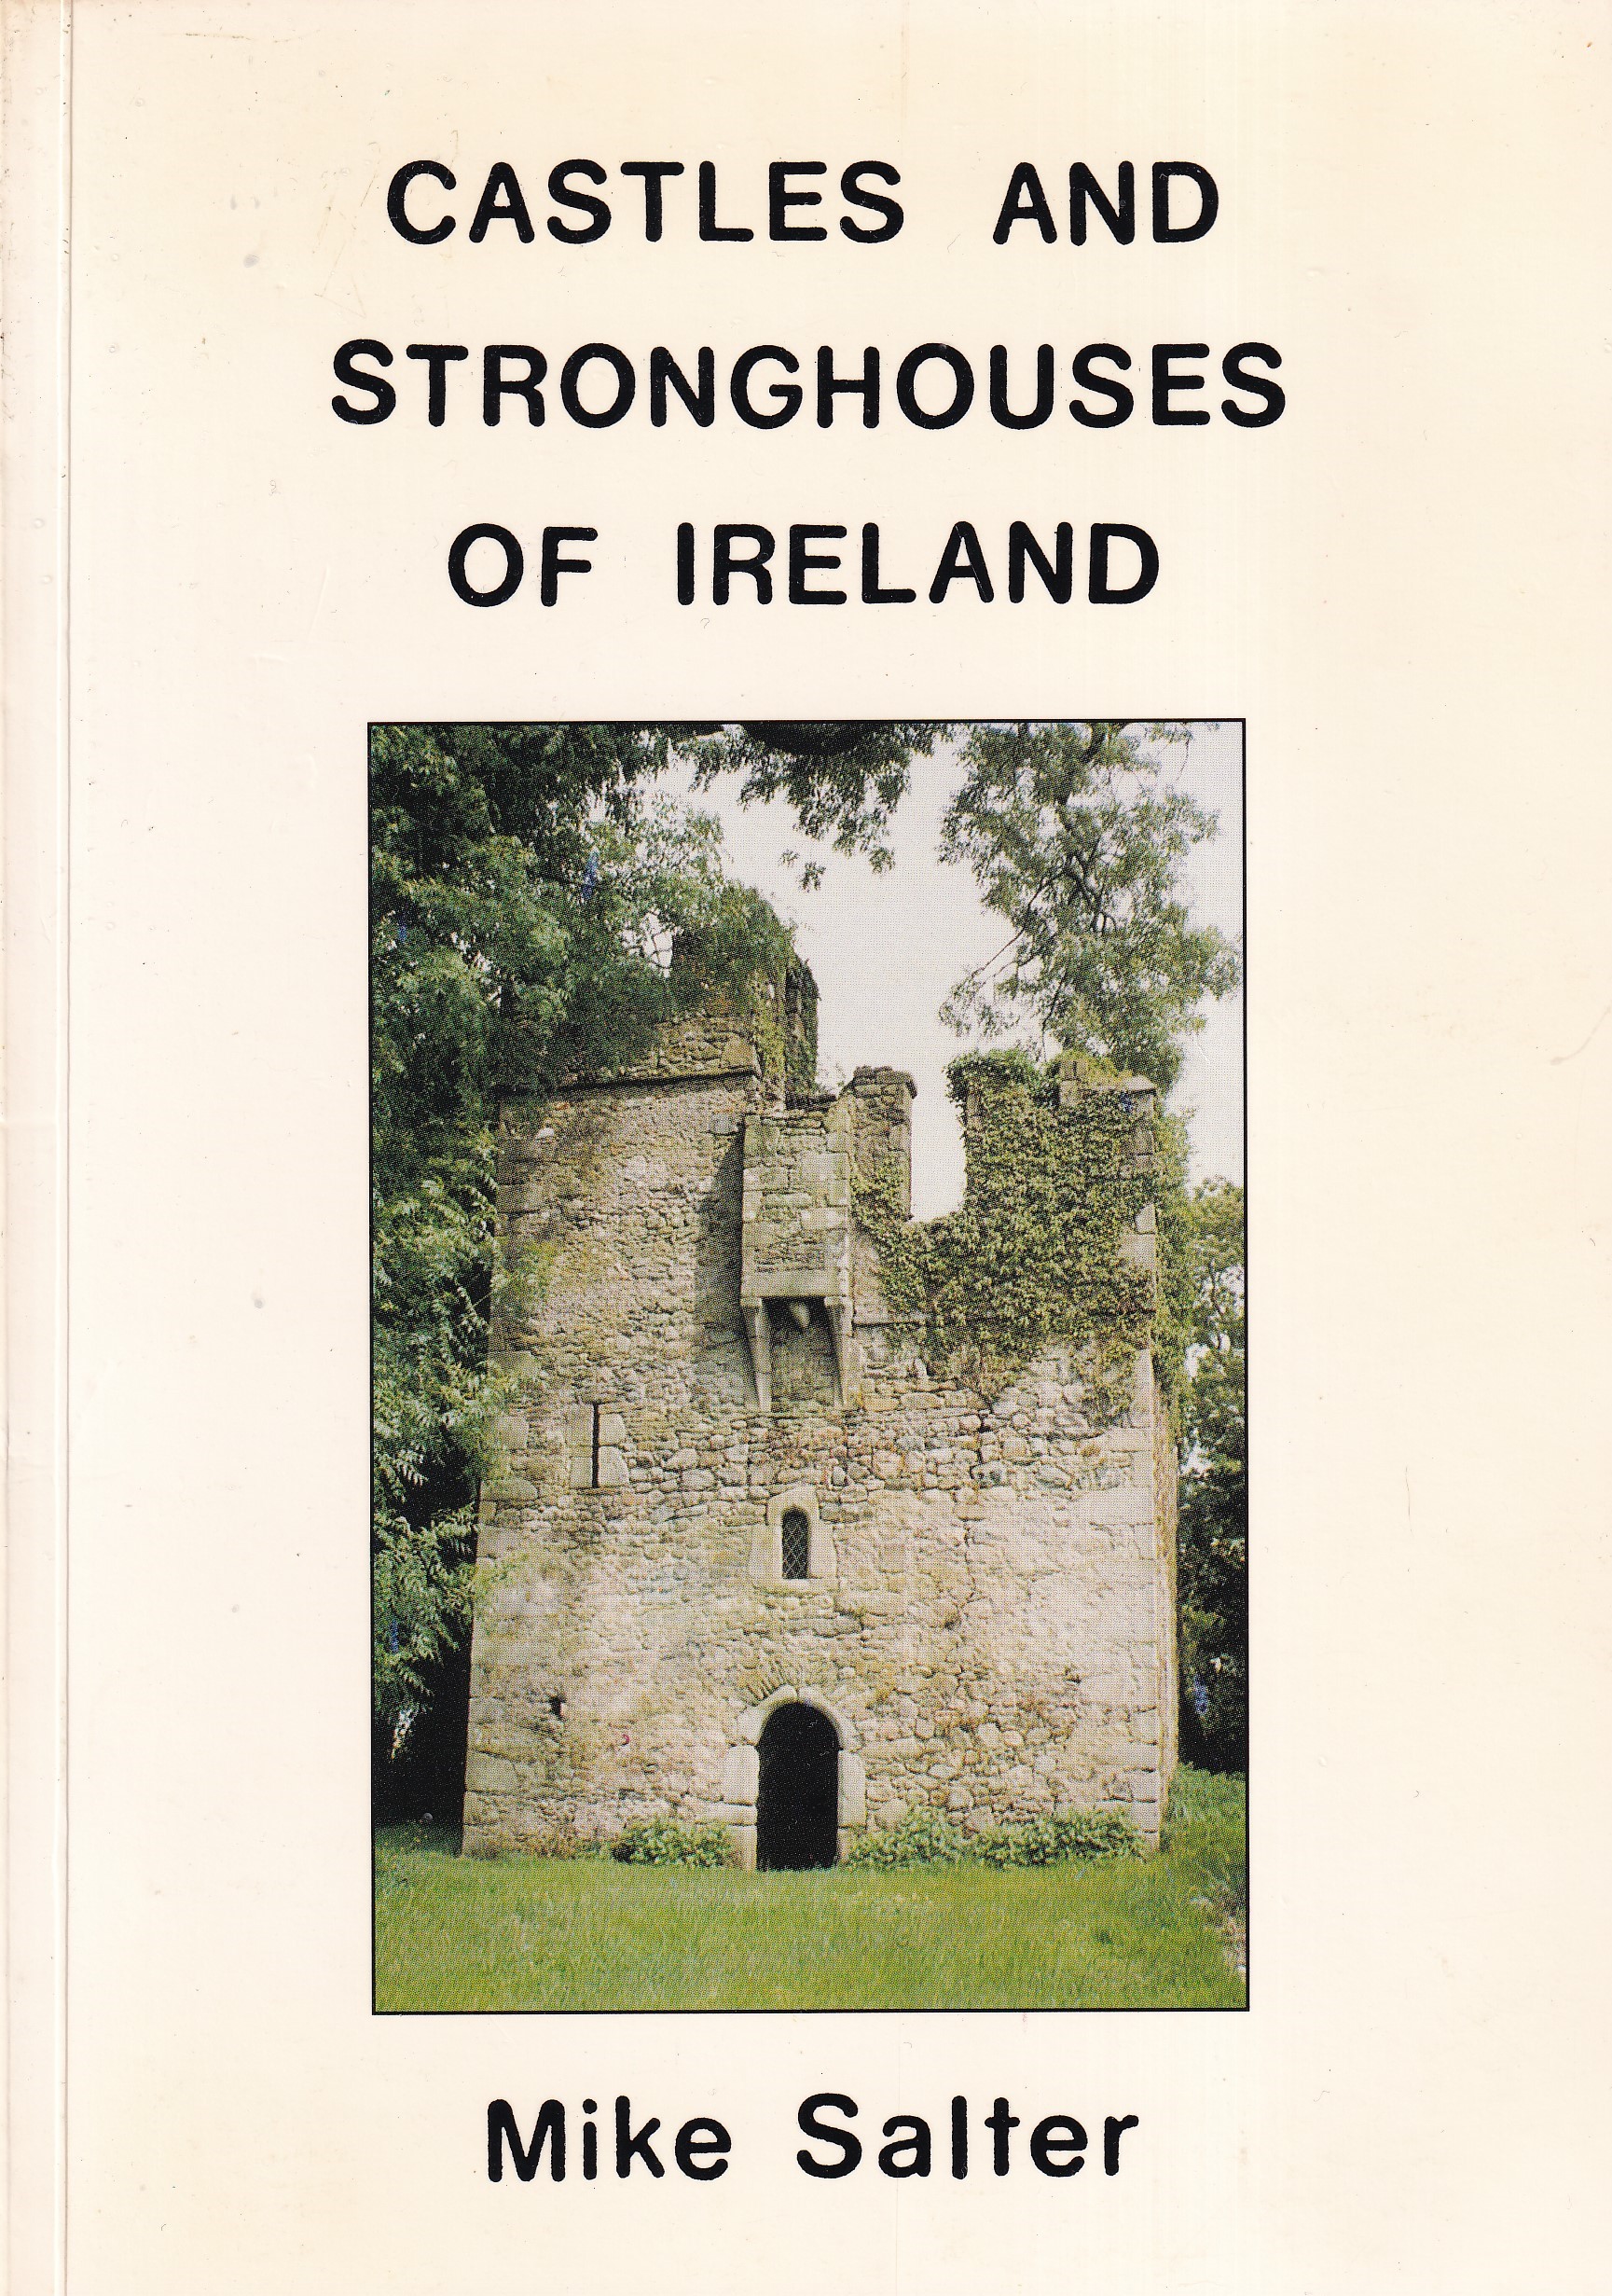 Castles and Stronghouses of Ireland by Mike Salter